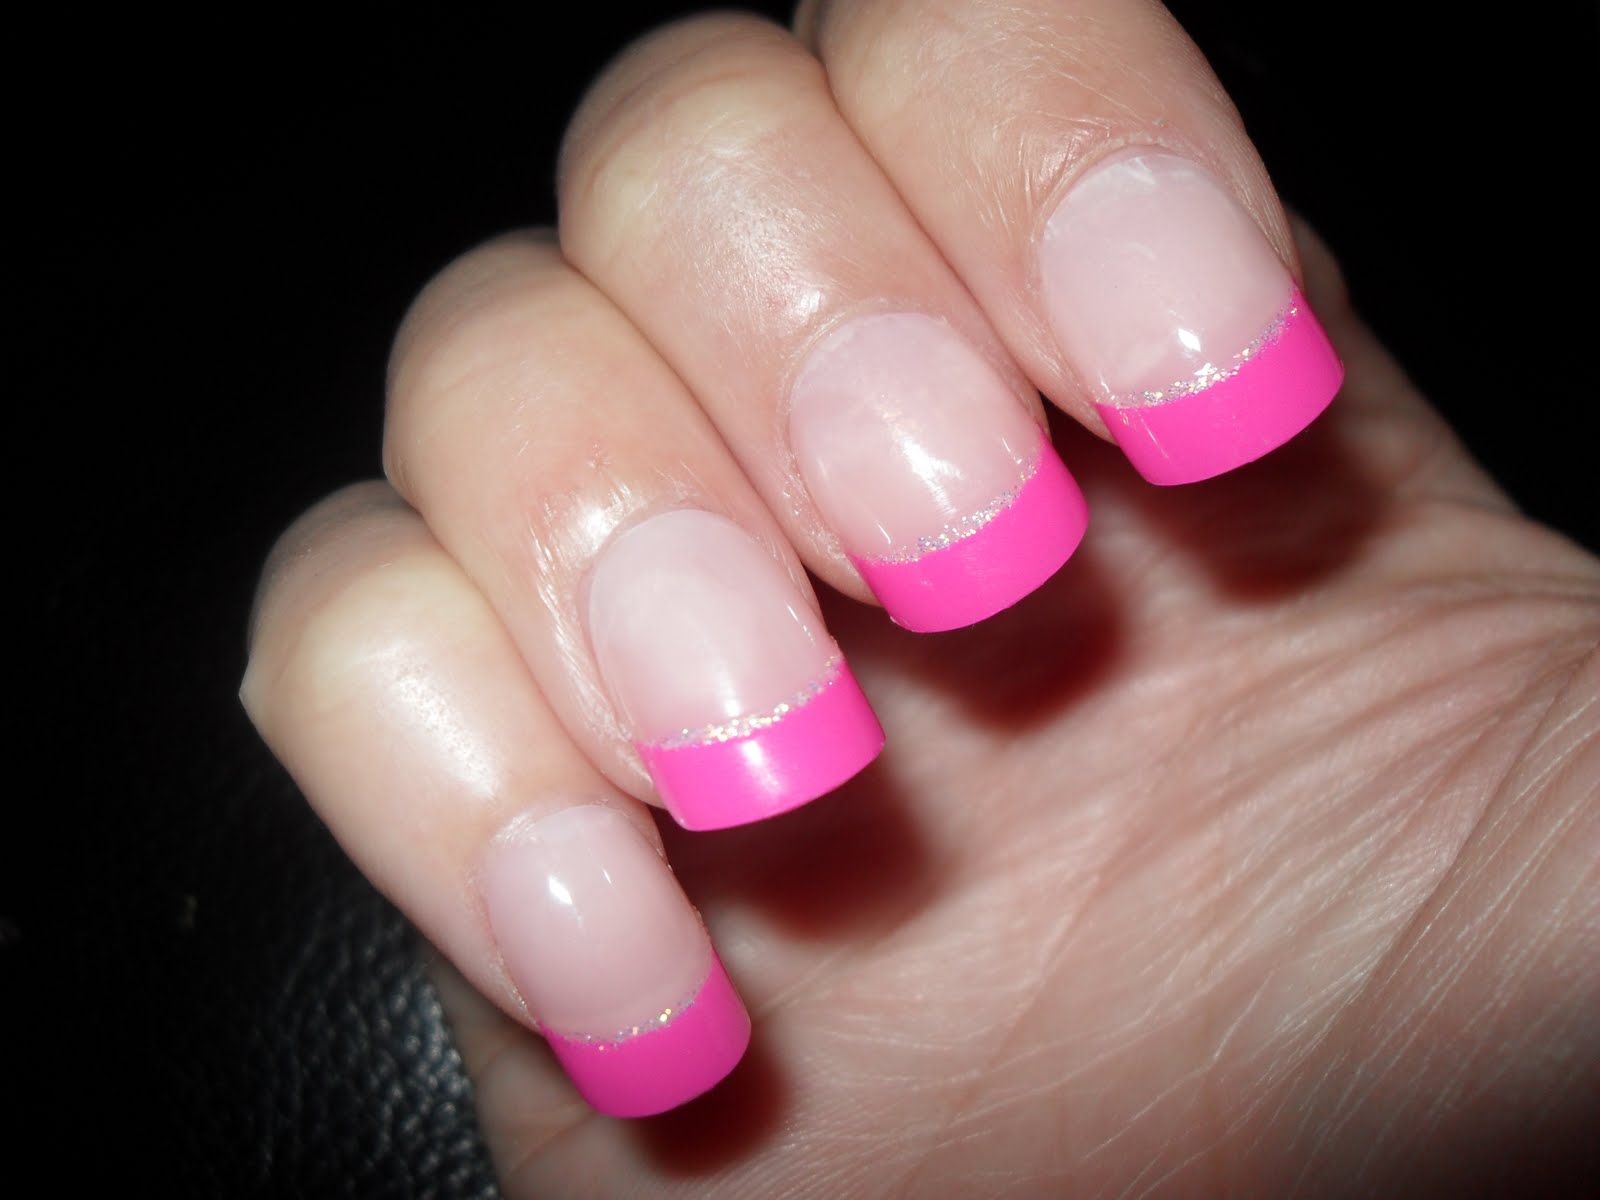 1. French Manicure with Pink and White Floral Nail Art - wide 7